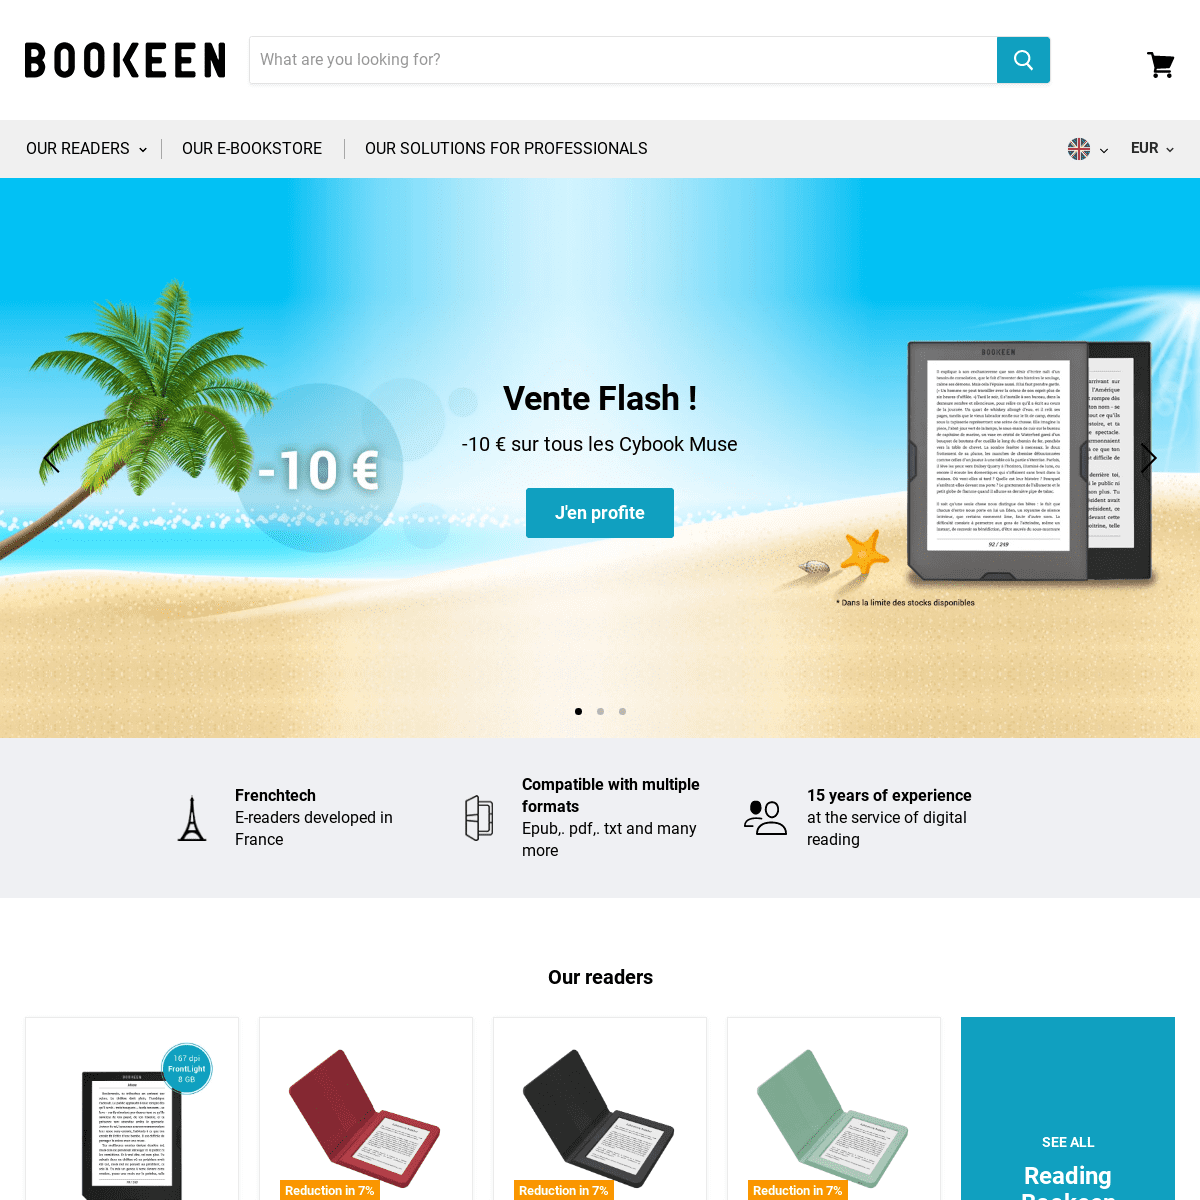 A complete backup of bookeen.fr